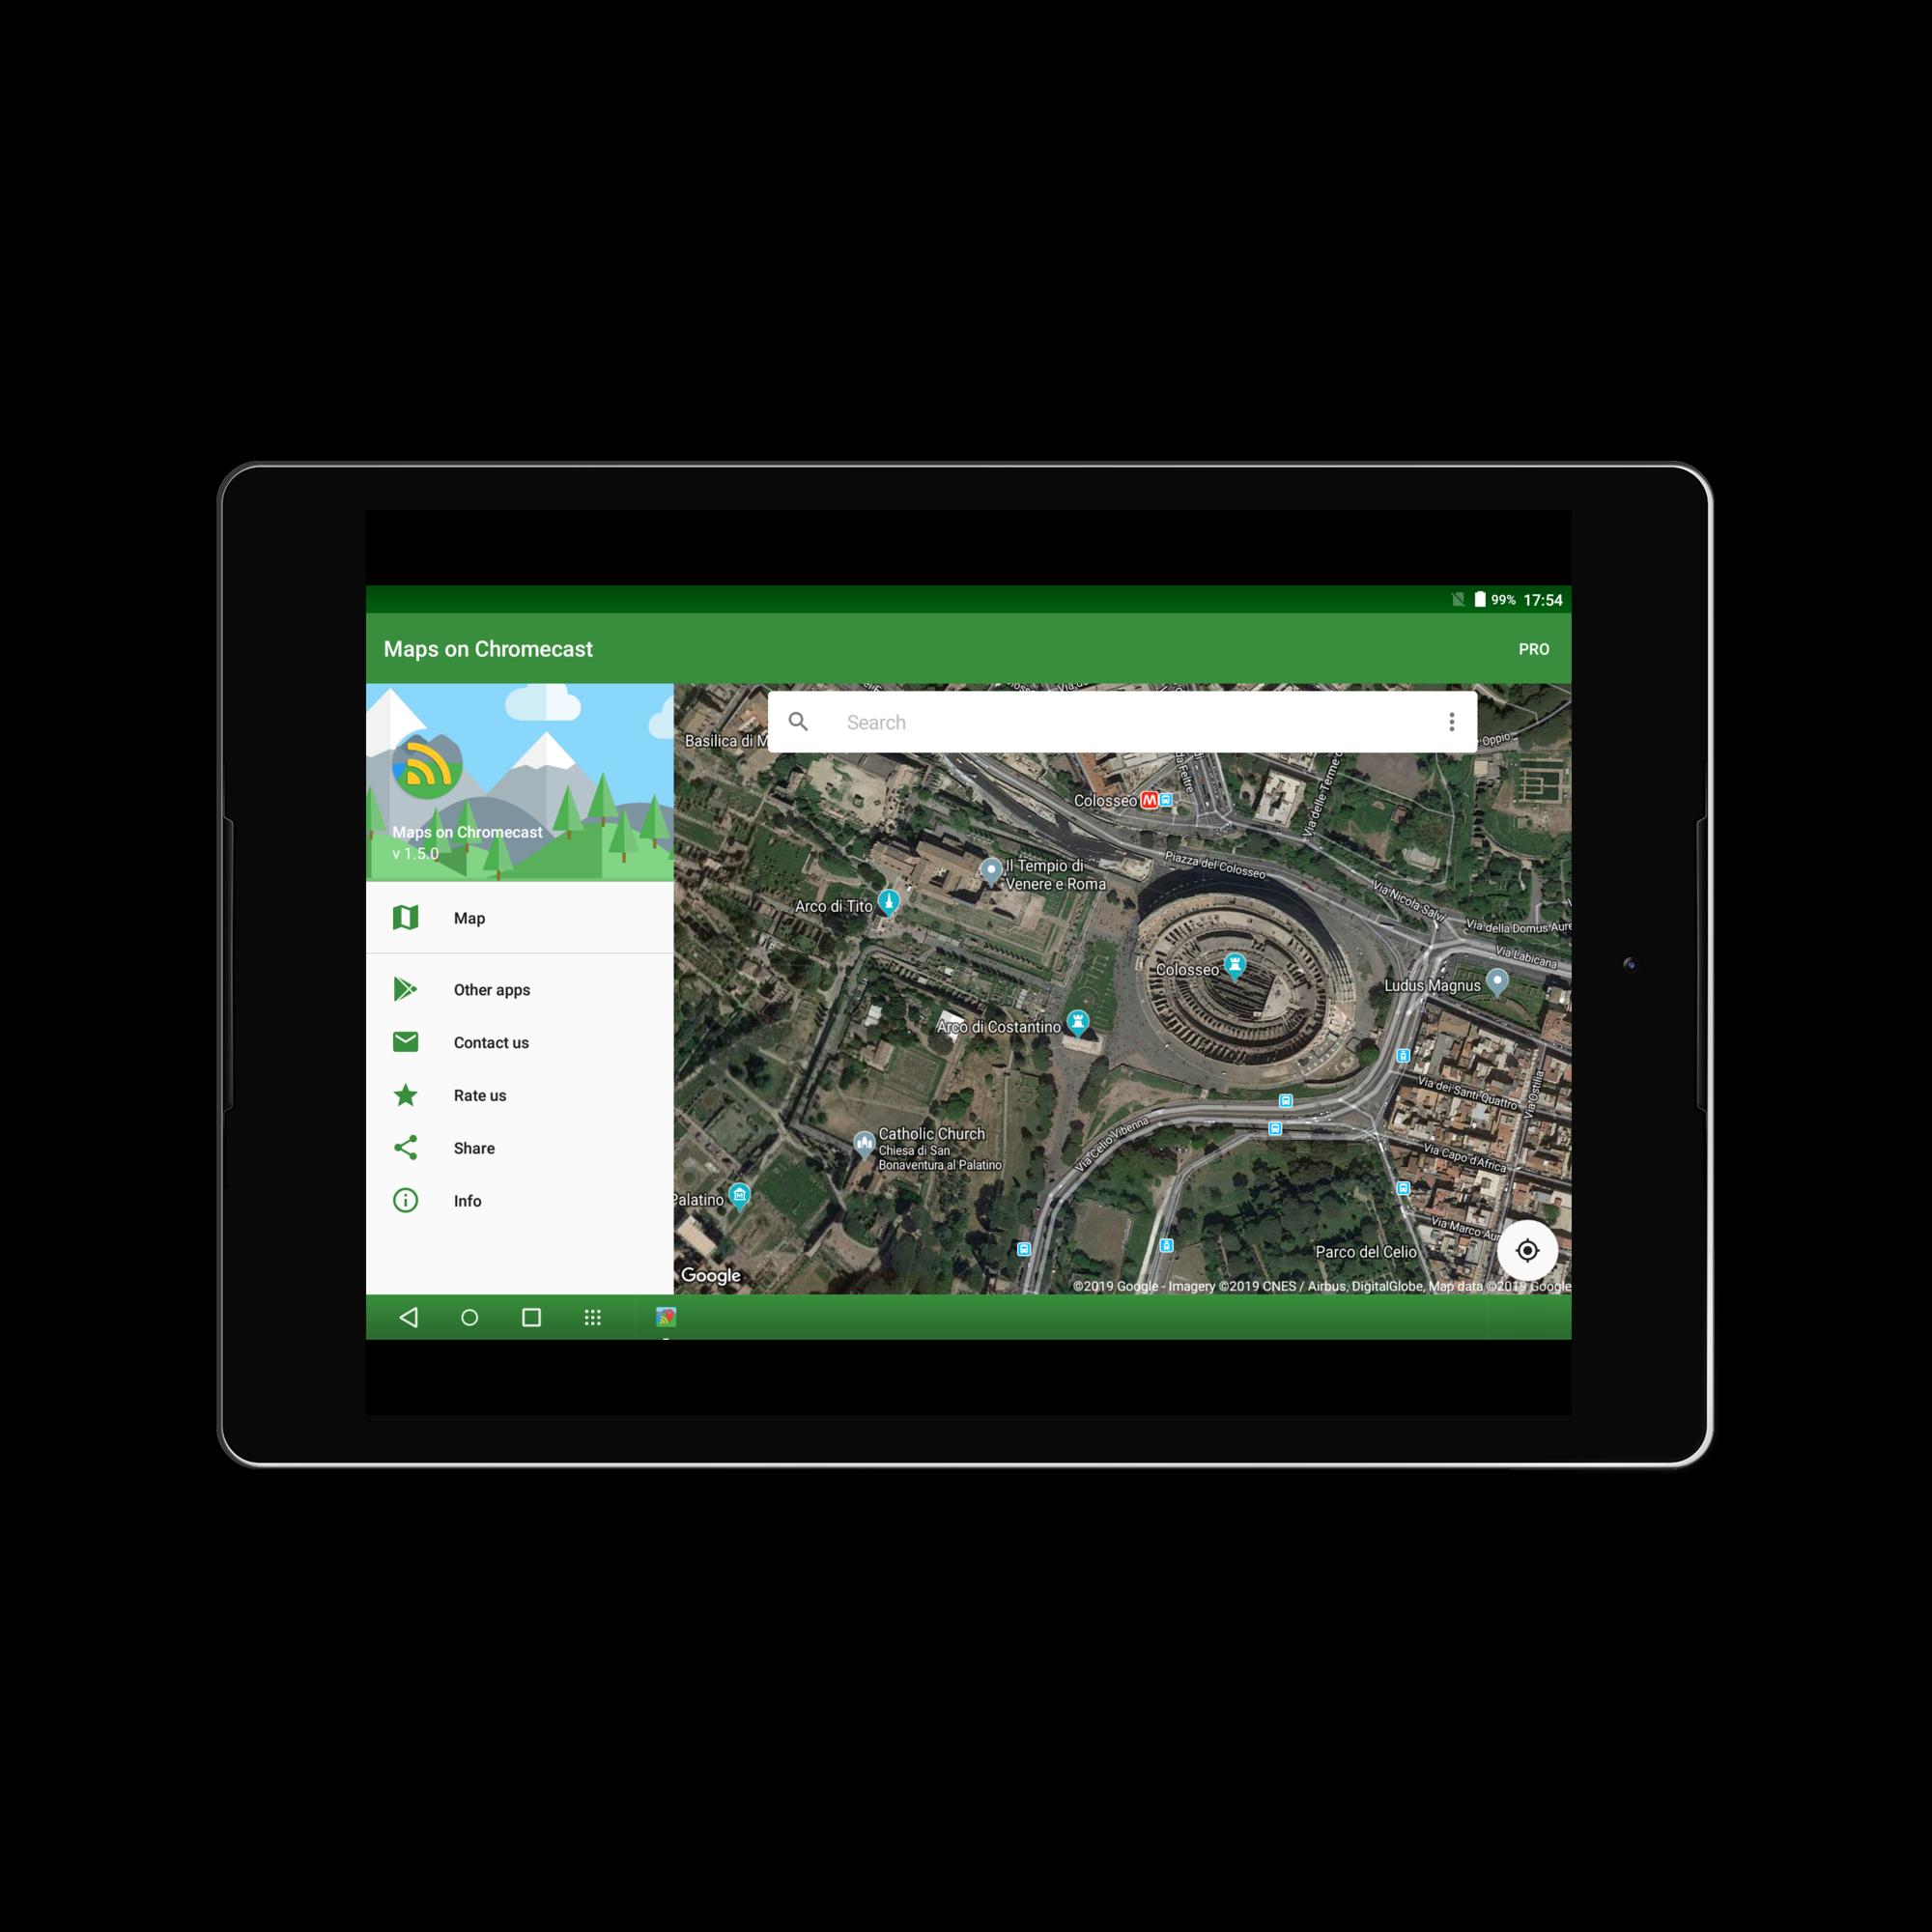 Maps on Chromecast for Android - APK Download